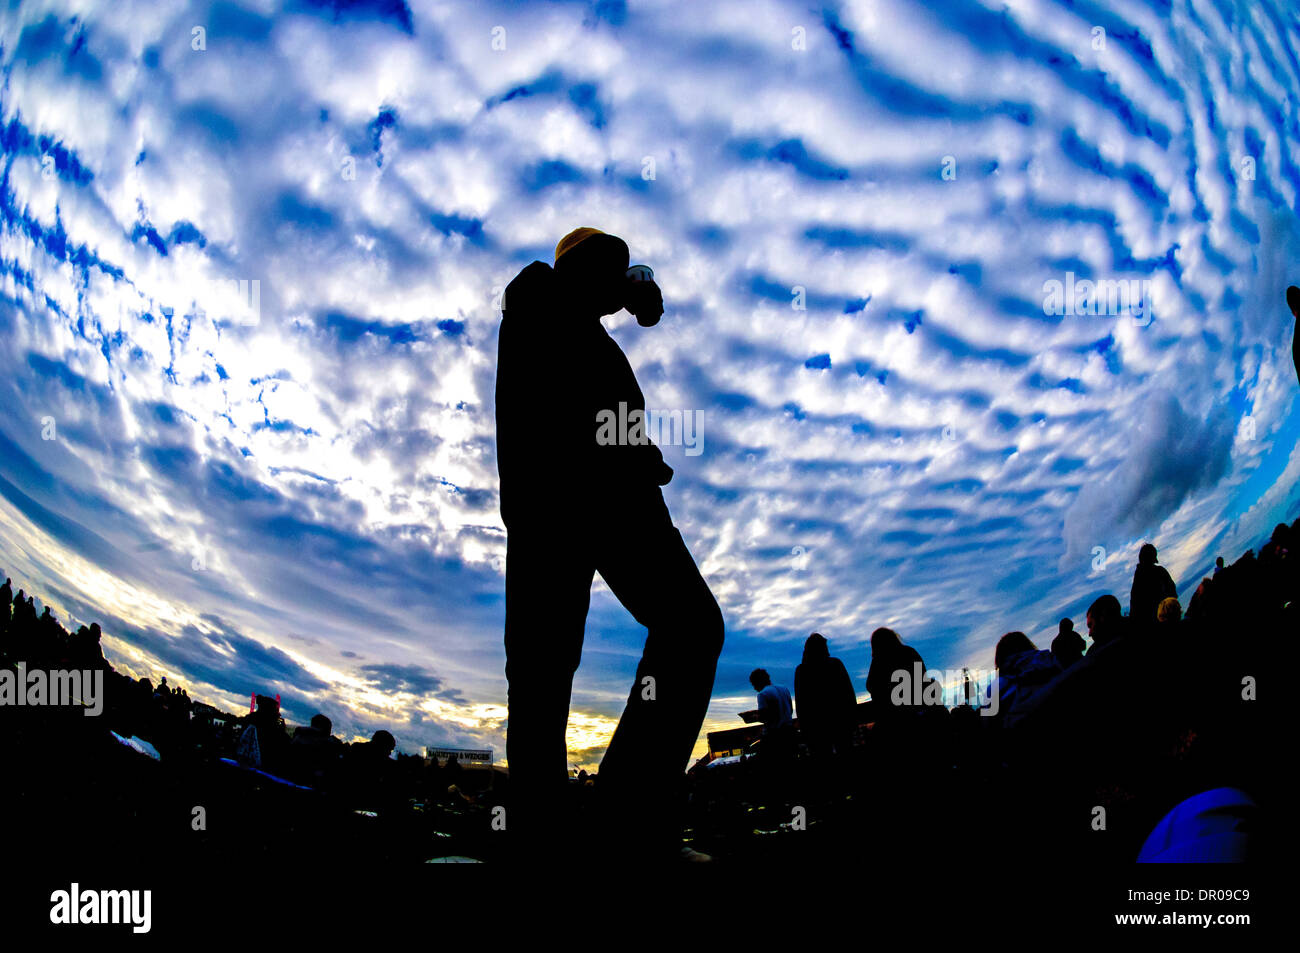 Festival goers silhouetted against cloudy blue sky Stock Photo